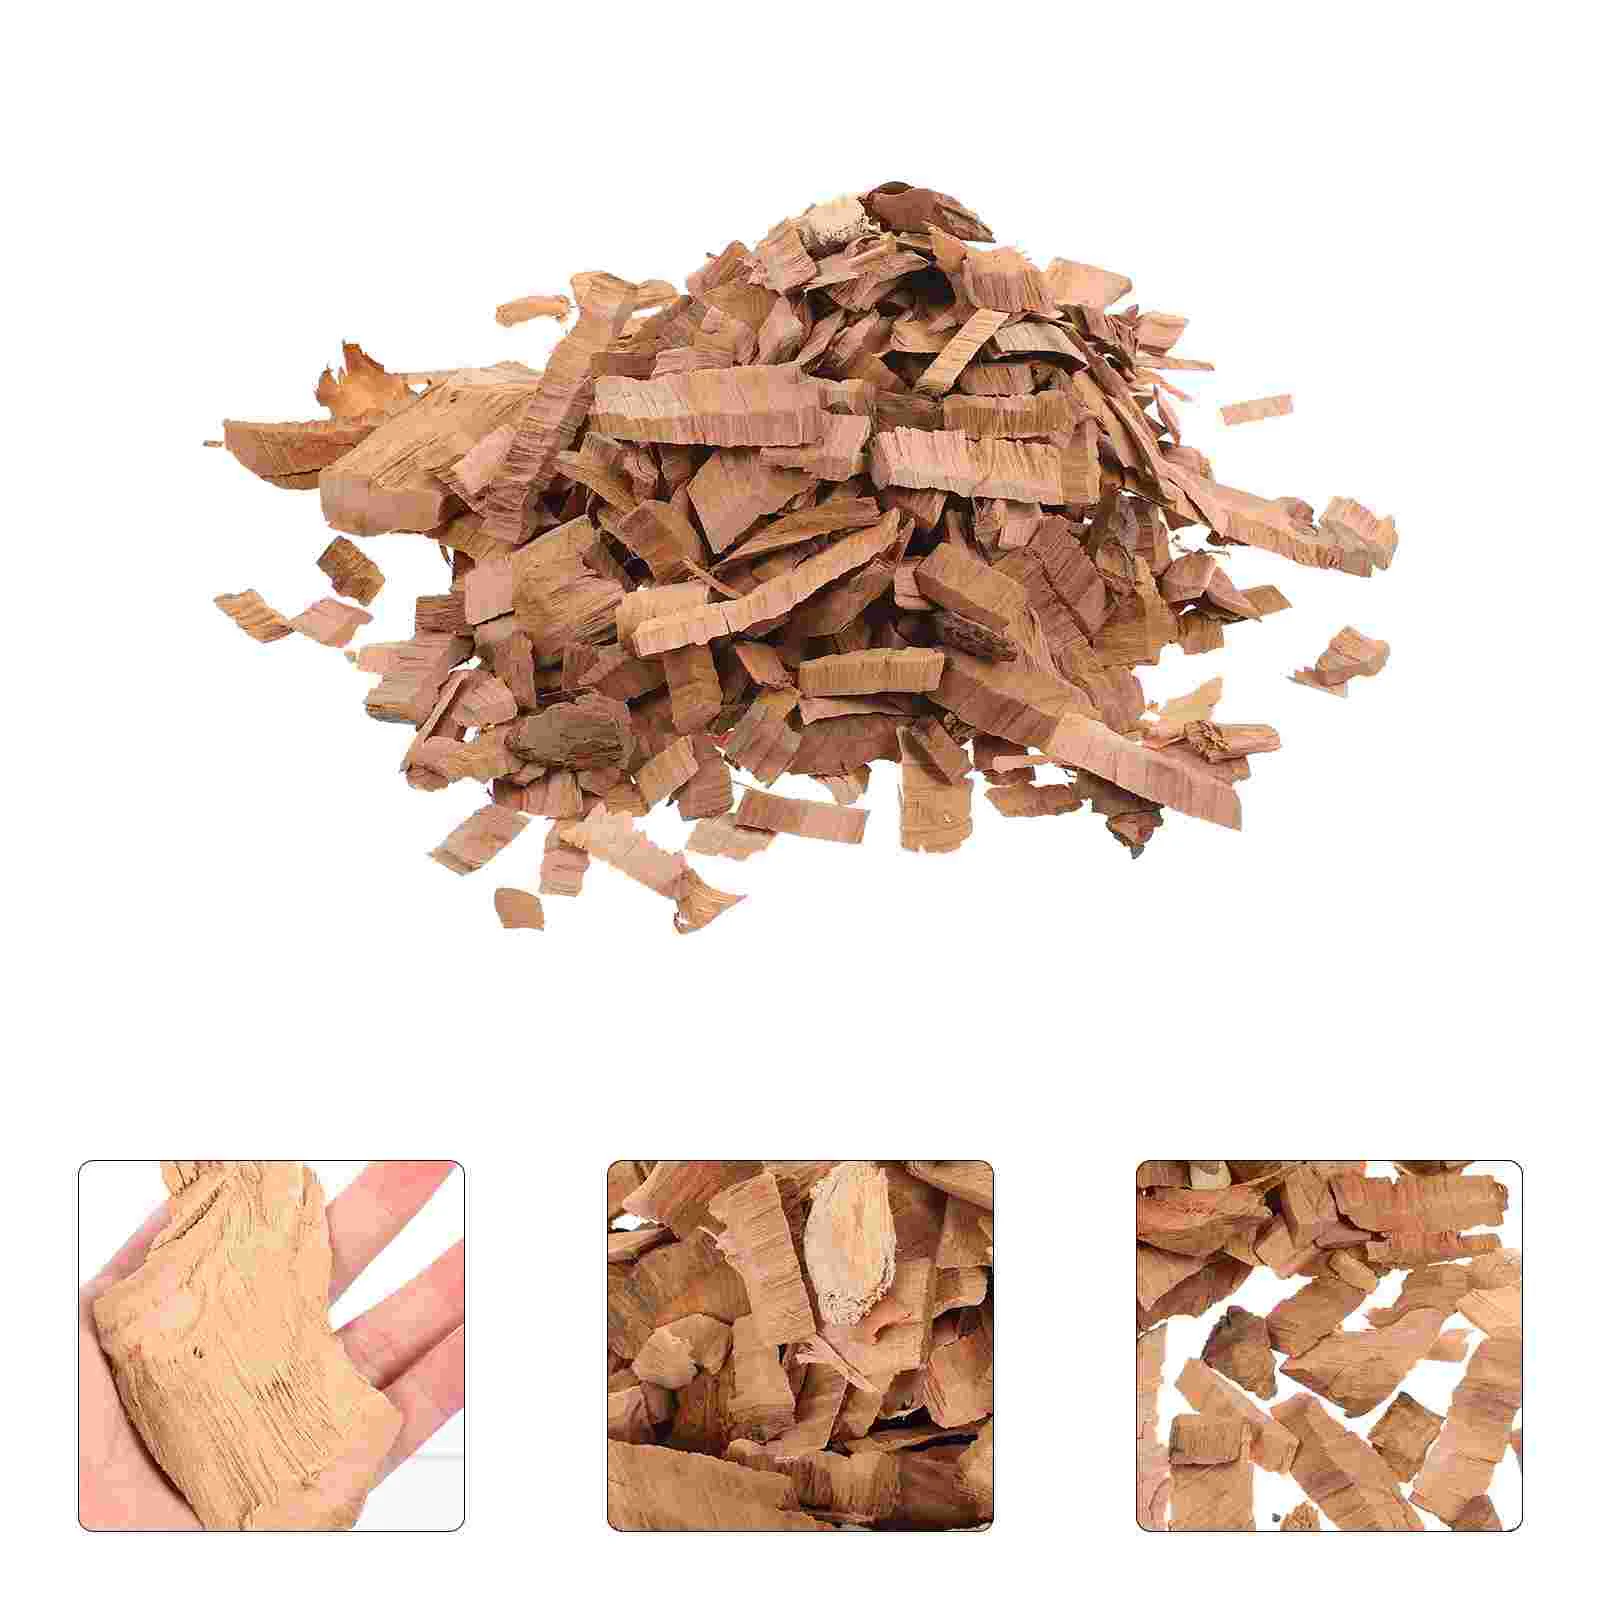 

Wood Chips Chunks Smoker Apple Smoking Bbq Barbecuecooking Products Accessories Camping Pecanoak Shavings Sawdust Hickory